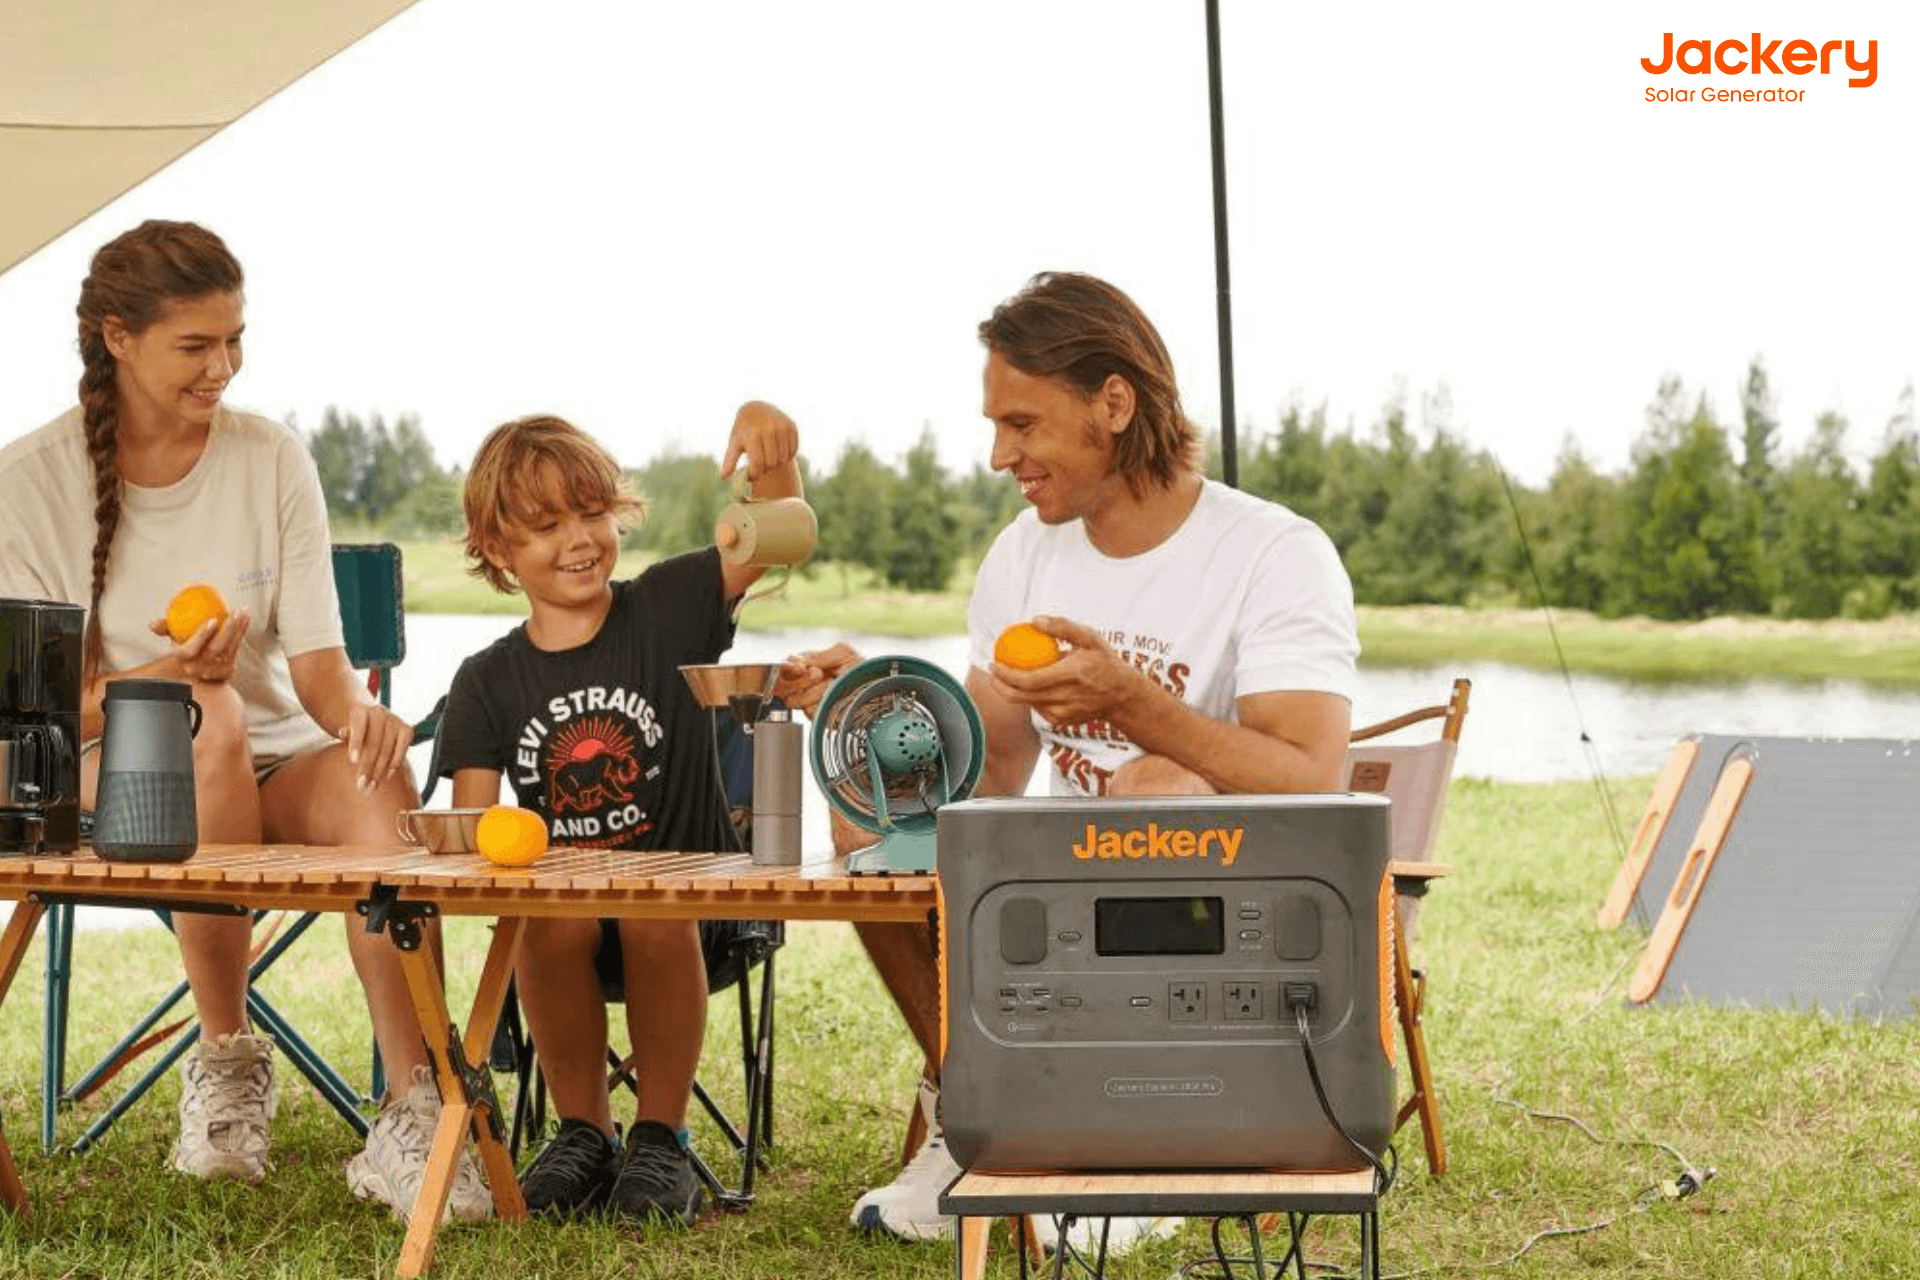 Jackery solar generator 2000 pro for dispersed camping